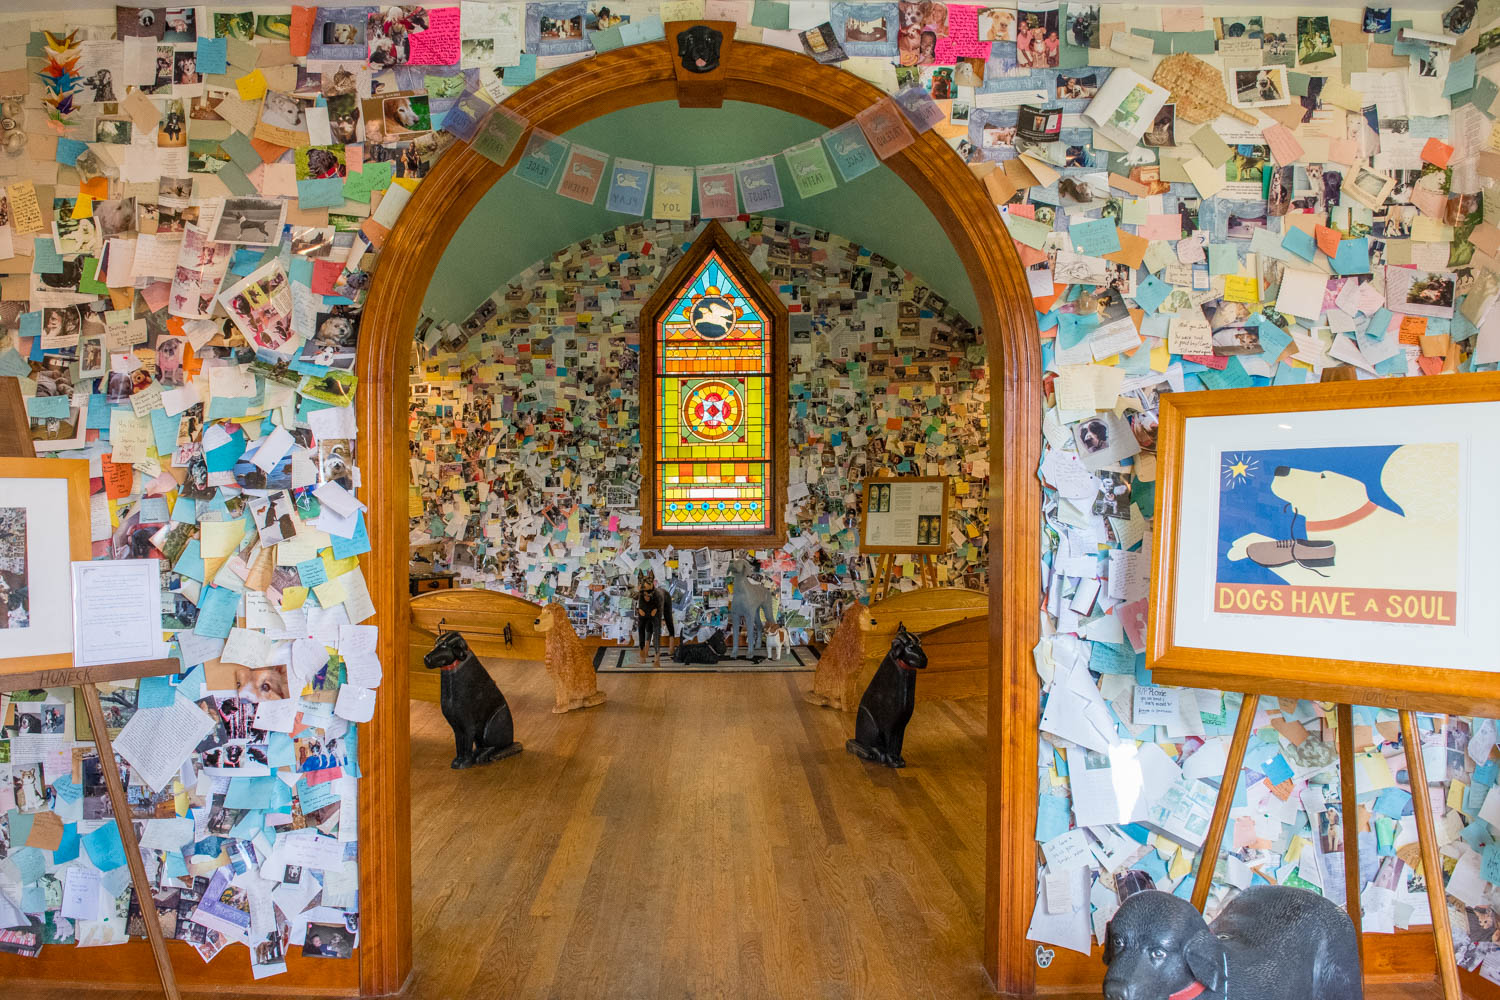 Photo of inside the Dog Chapel in St. Johnsbury, VT taken by Accidentally Wes Anderson